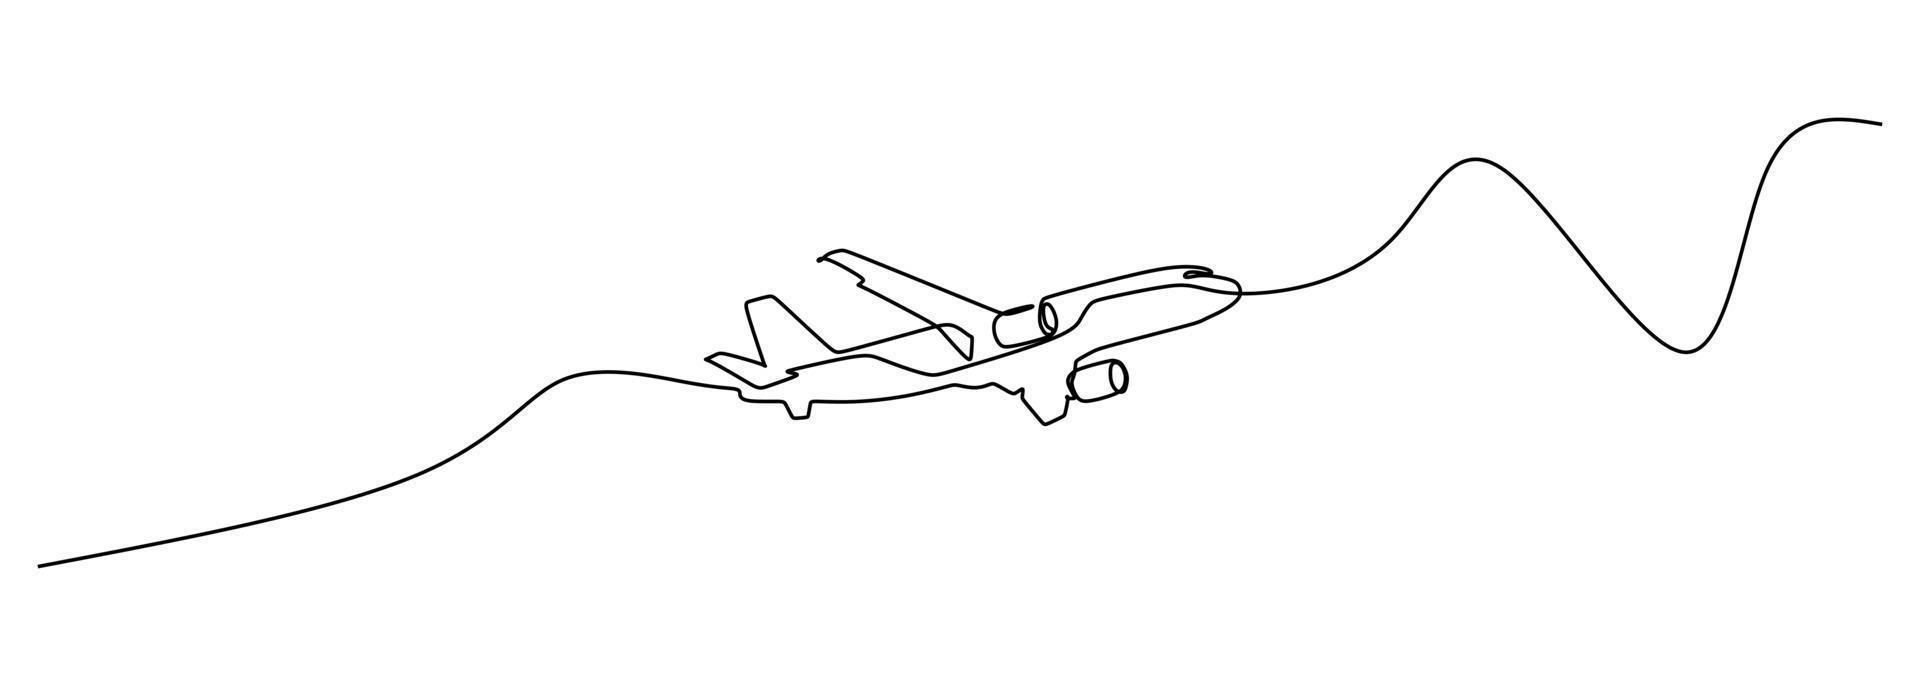 Single line drawing  commercial airplane takeoff and climb. Takeoff is the phase of flight in which an aerospace vehicle leaves the ground and becomes airborne. Vector illustration for transportation